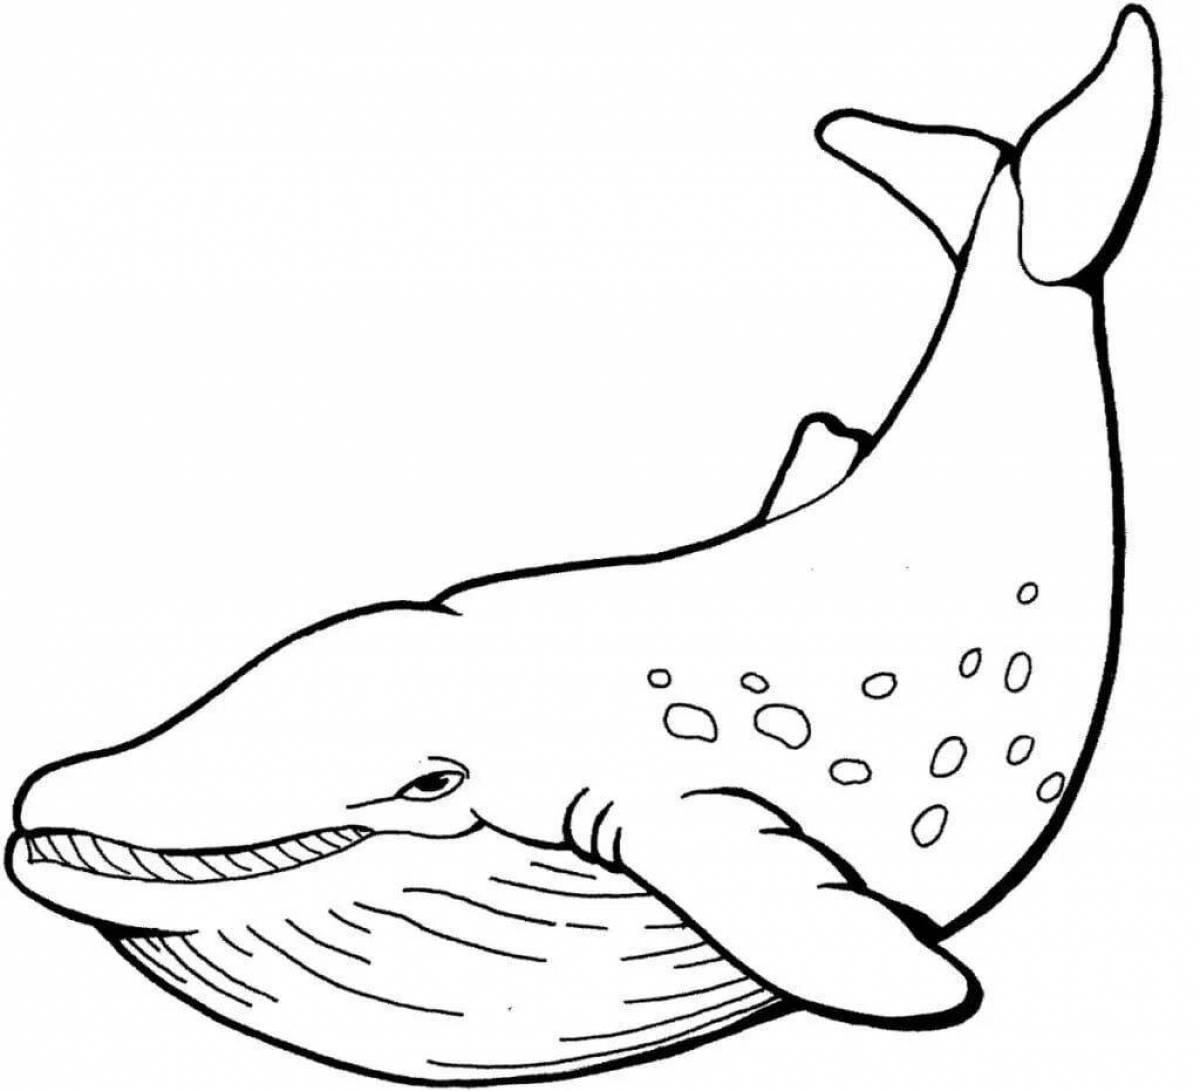 Coloring book beautiful bowhead whale